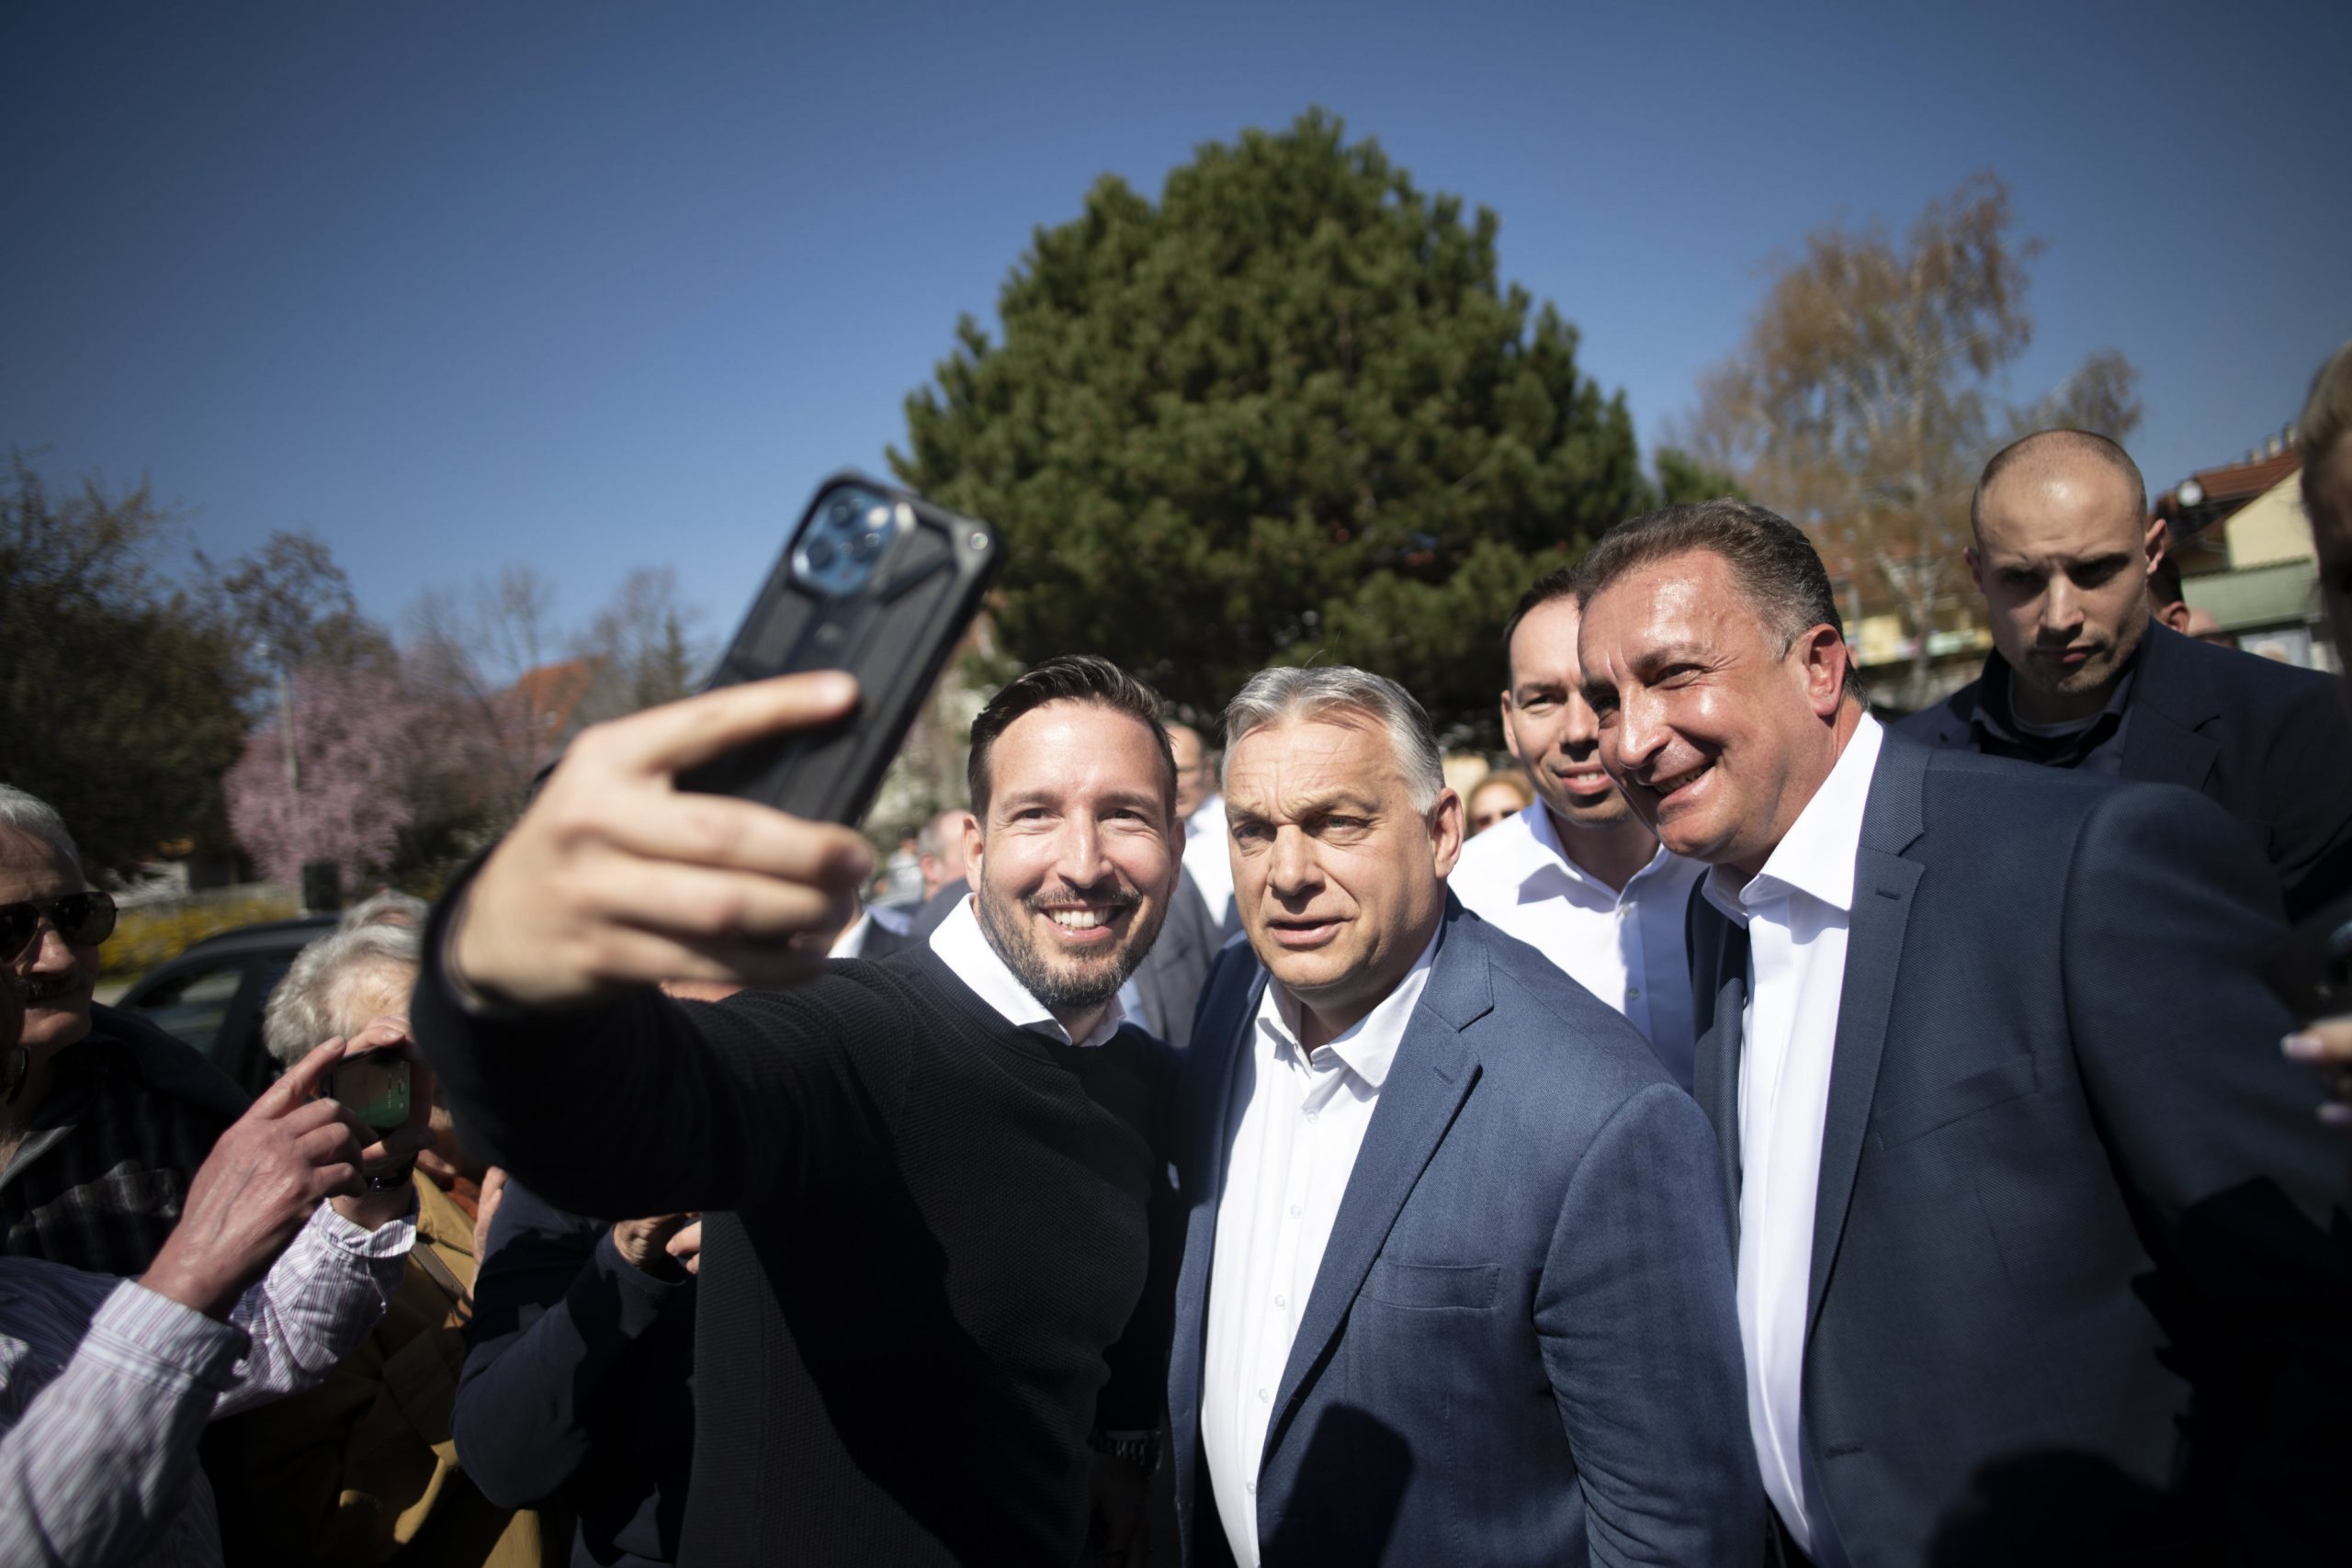 PM Orbán: Peace and Security at Stake in Election